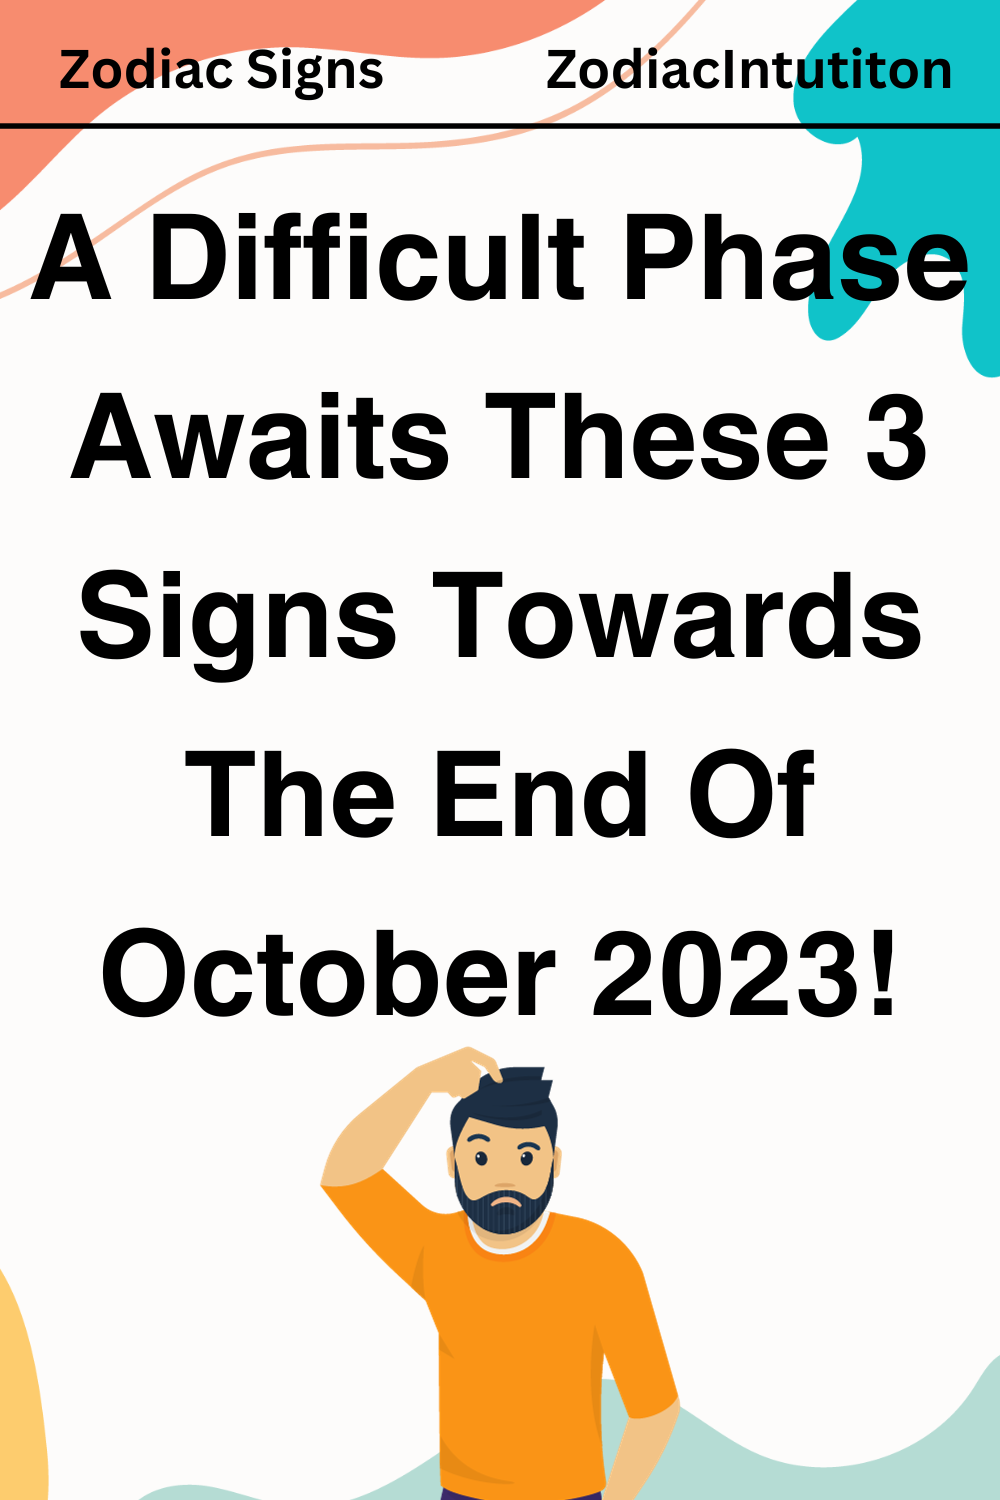 A Difficult Phase Awaits These 3 Signs Towards The End Of October 2023!